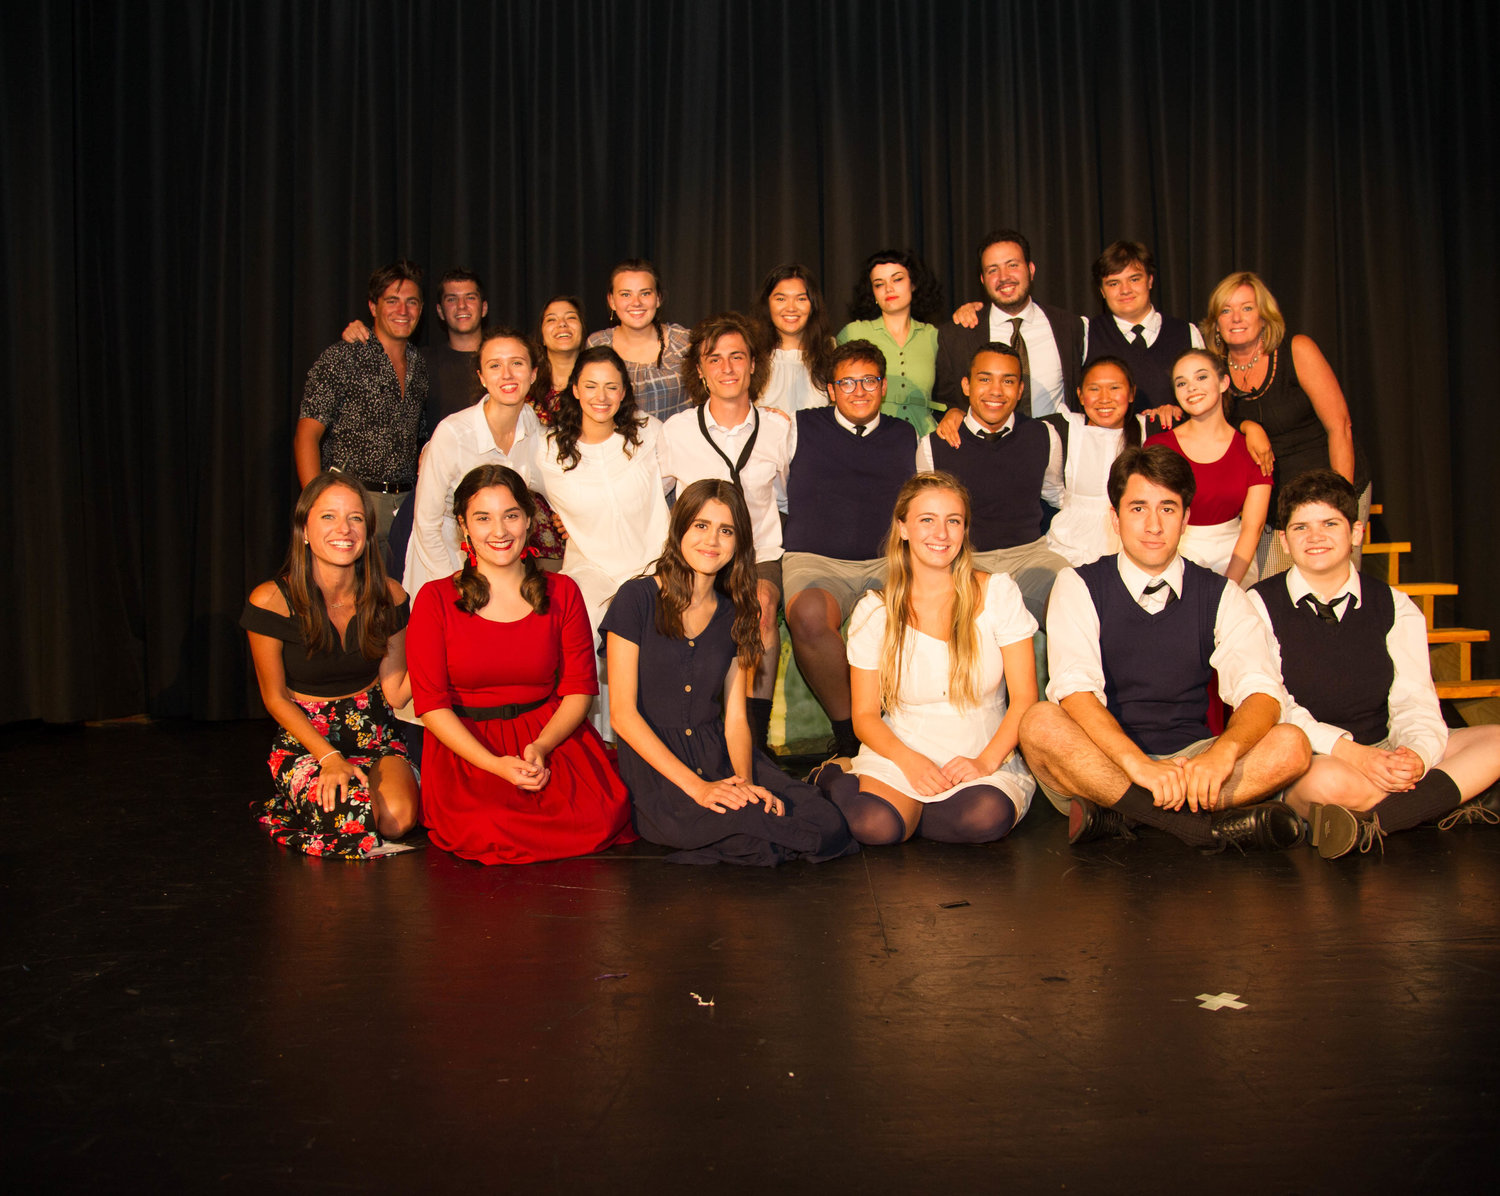 The cast of “Spring Awakening” ranges in age from 16 to 23. They performed on Aug. 1, 2, and 9 at Bellmore Showplace.